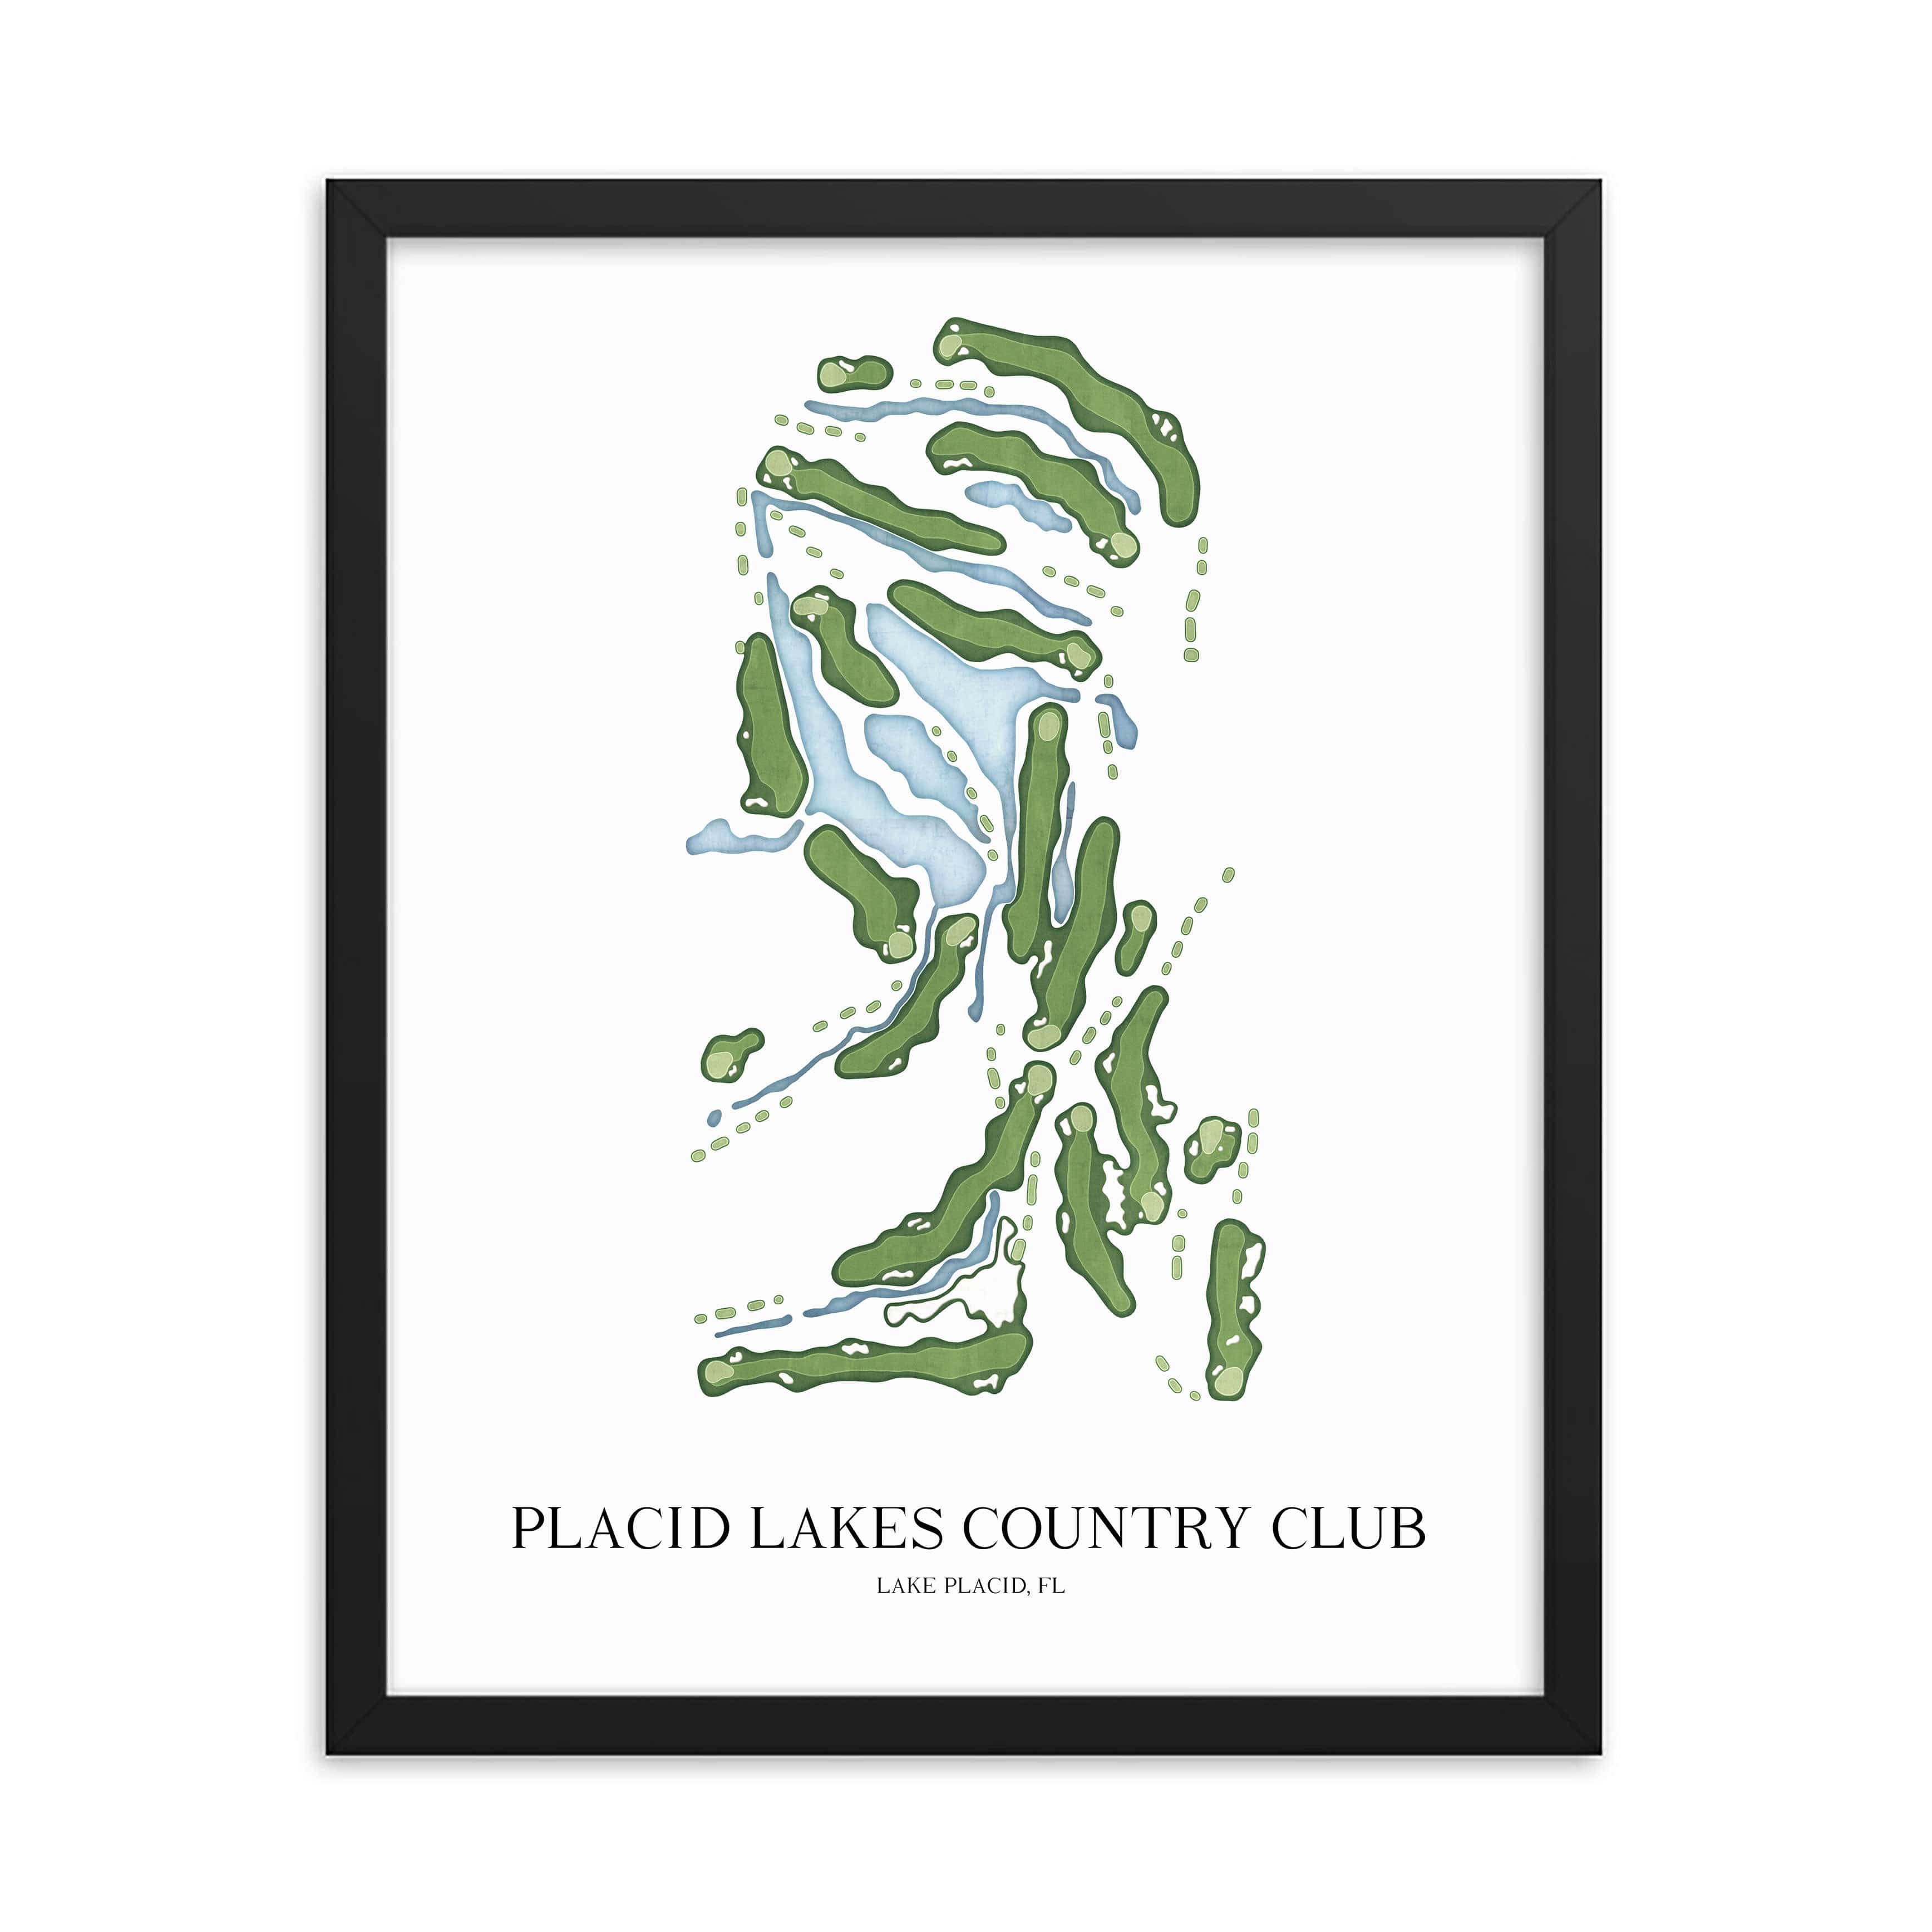 The 19th Hole Golf Shop - Golf Course Prints -  Placid Lakes Country Club Golf Course Map